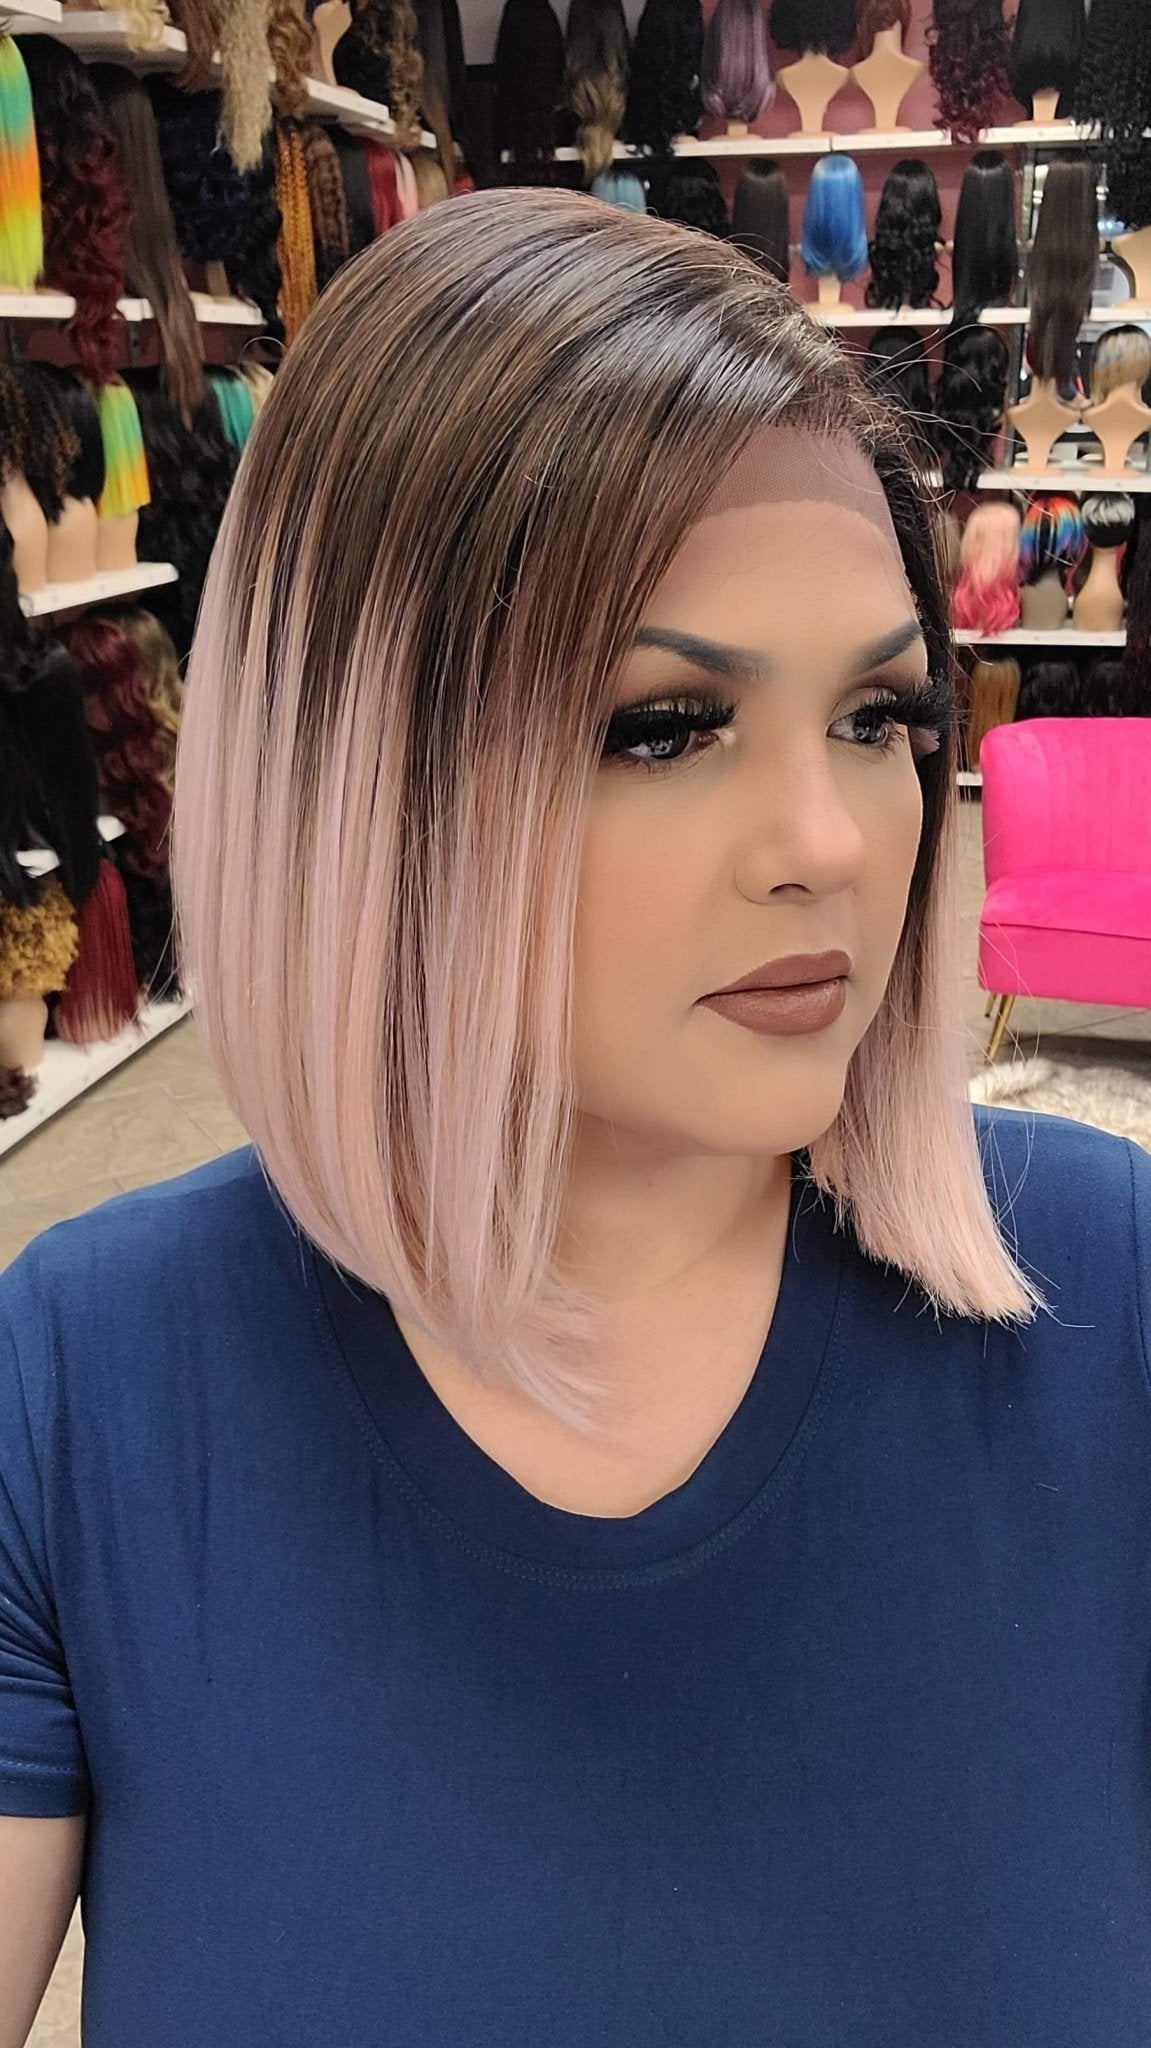 234 Tracy - 13x7 Free Part Lace Front Wig - PINK - DaizyKat Cosmetics 234 Tracy - 13x7 Free Part Lace Front Wig - PINK DaizyKat Cosmetics Wigs